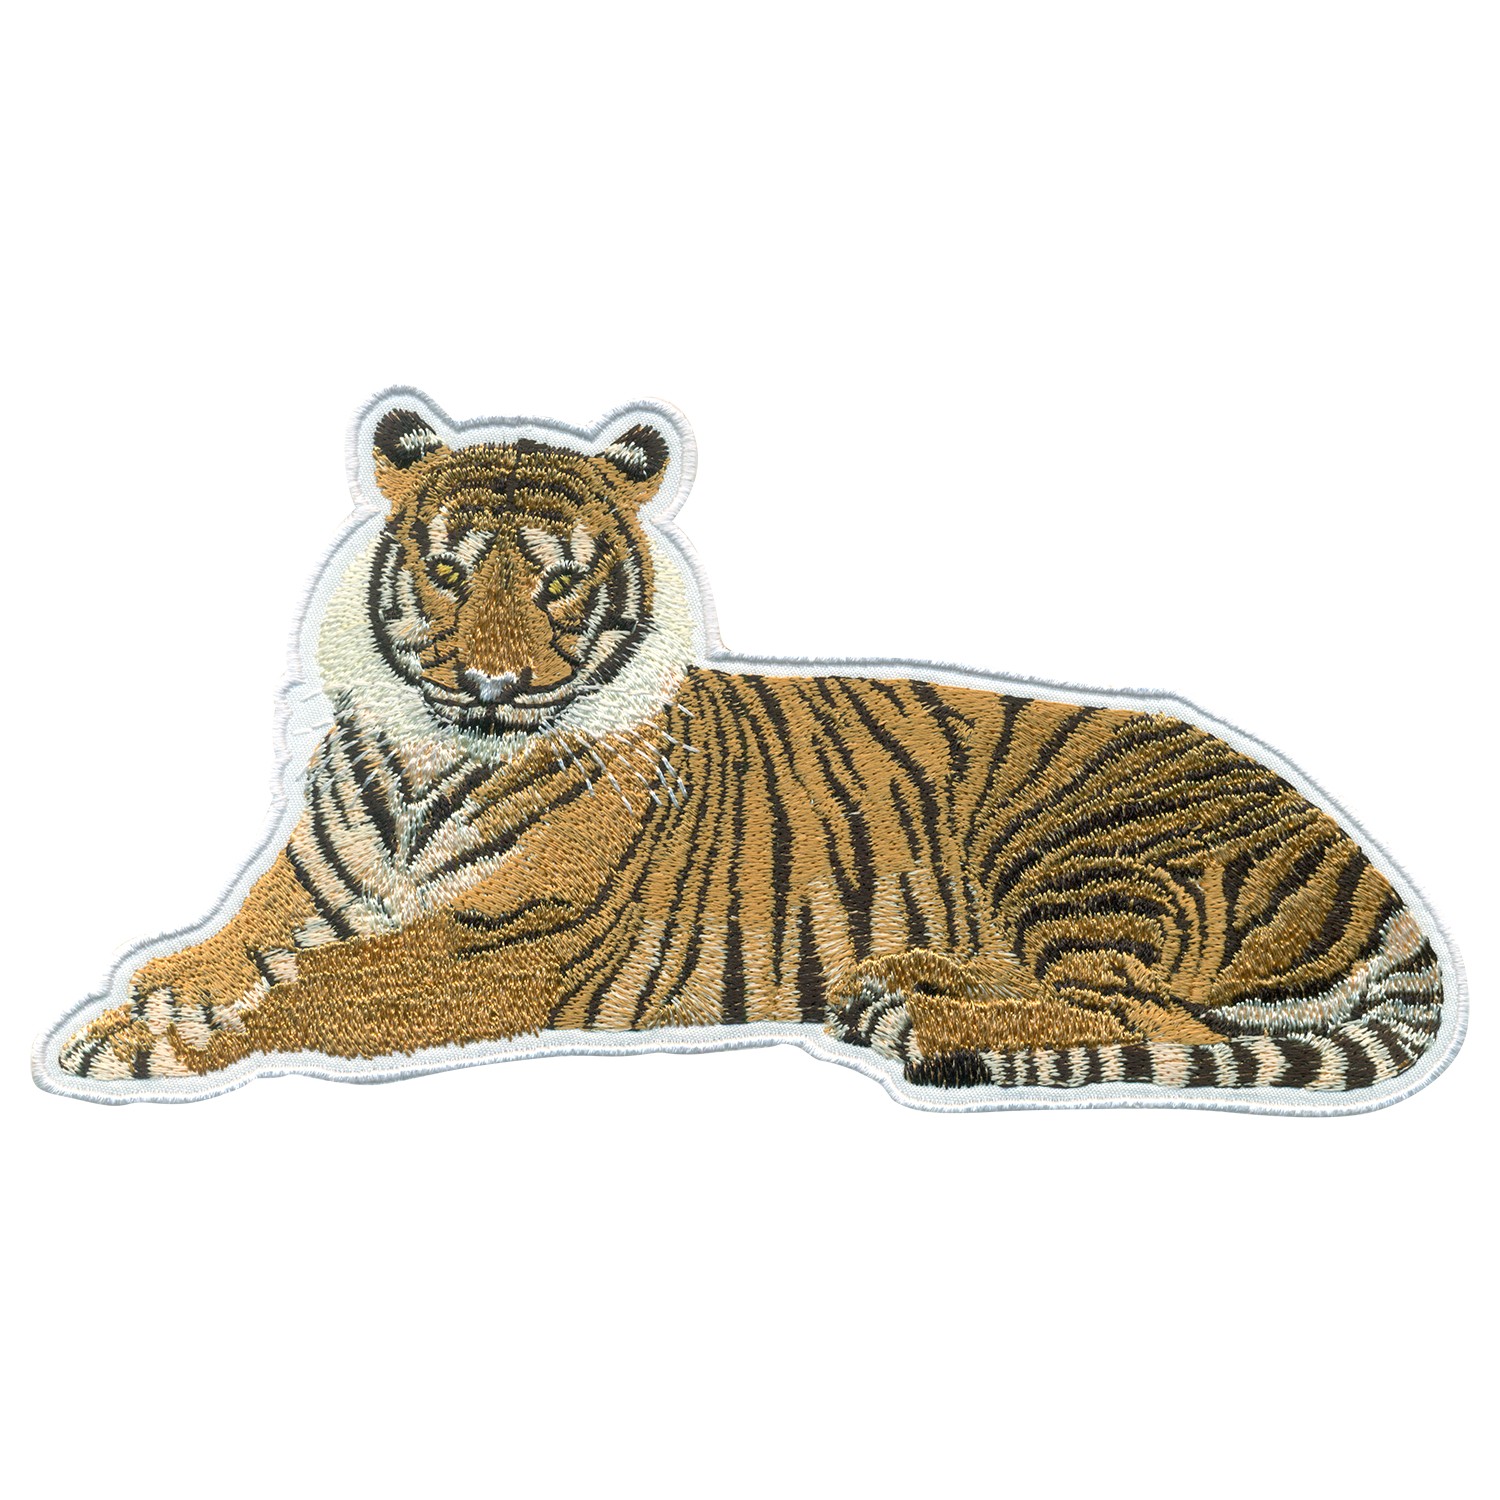 Embroidered Bengal Tiger (4 x 8 inch) - Shop Biker Patches ...